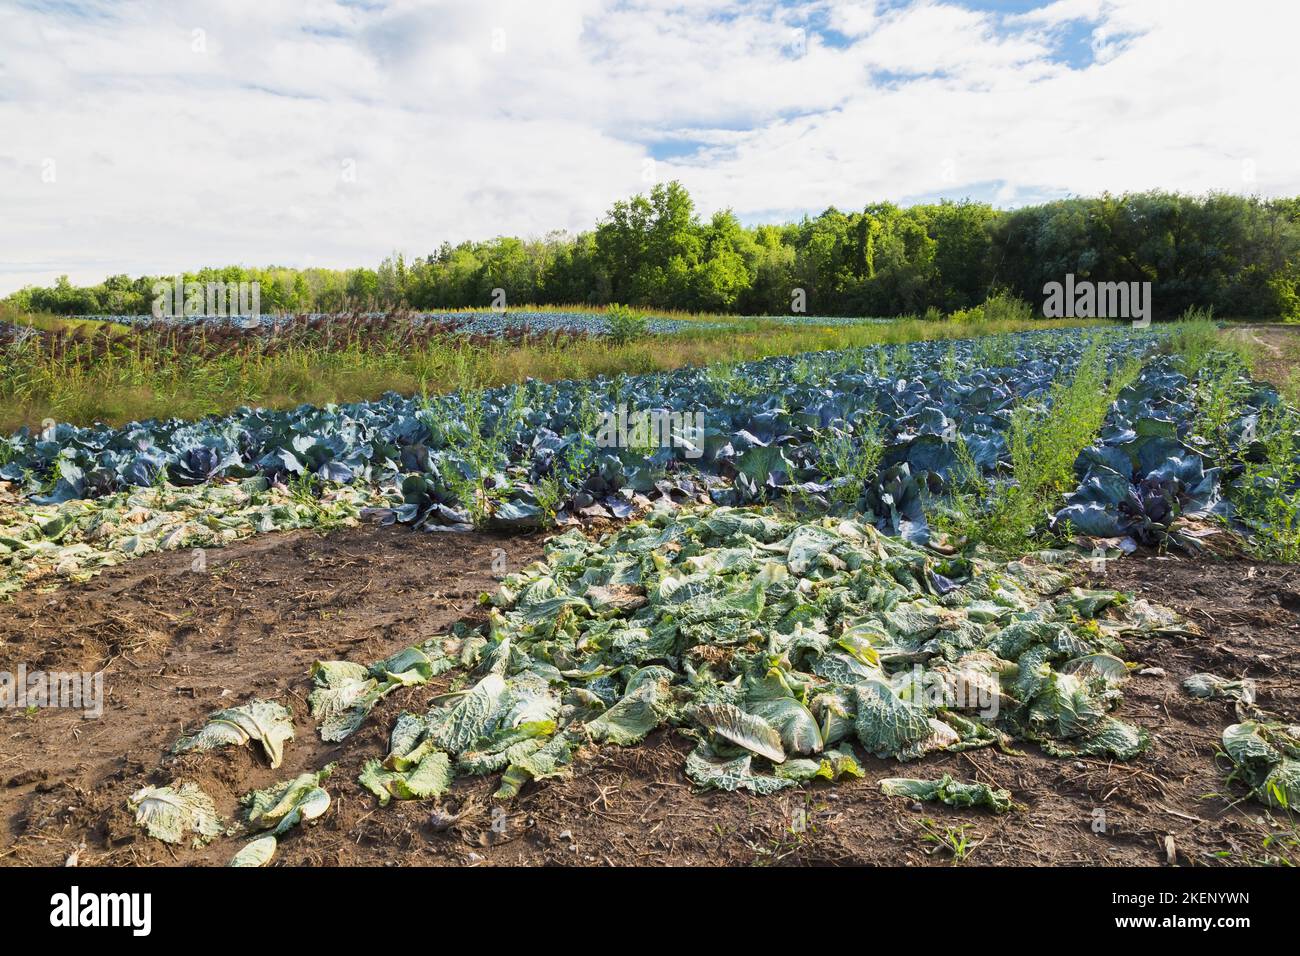 Pile of decomposing Brassica oleracea -Cabbage crops in agricultural field. Stock Photo